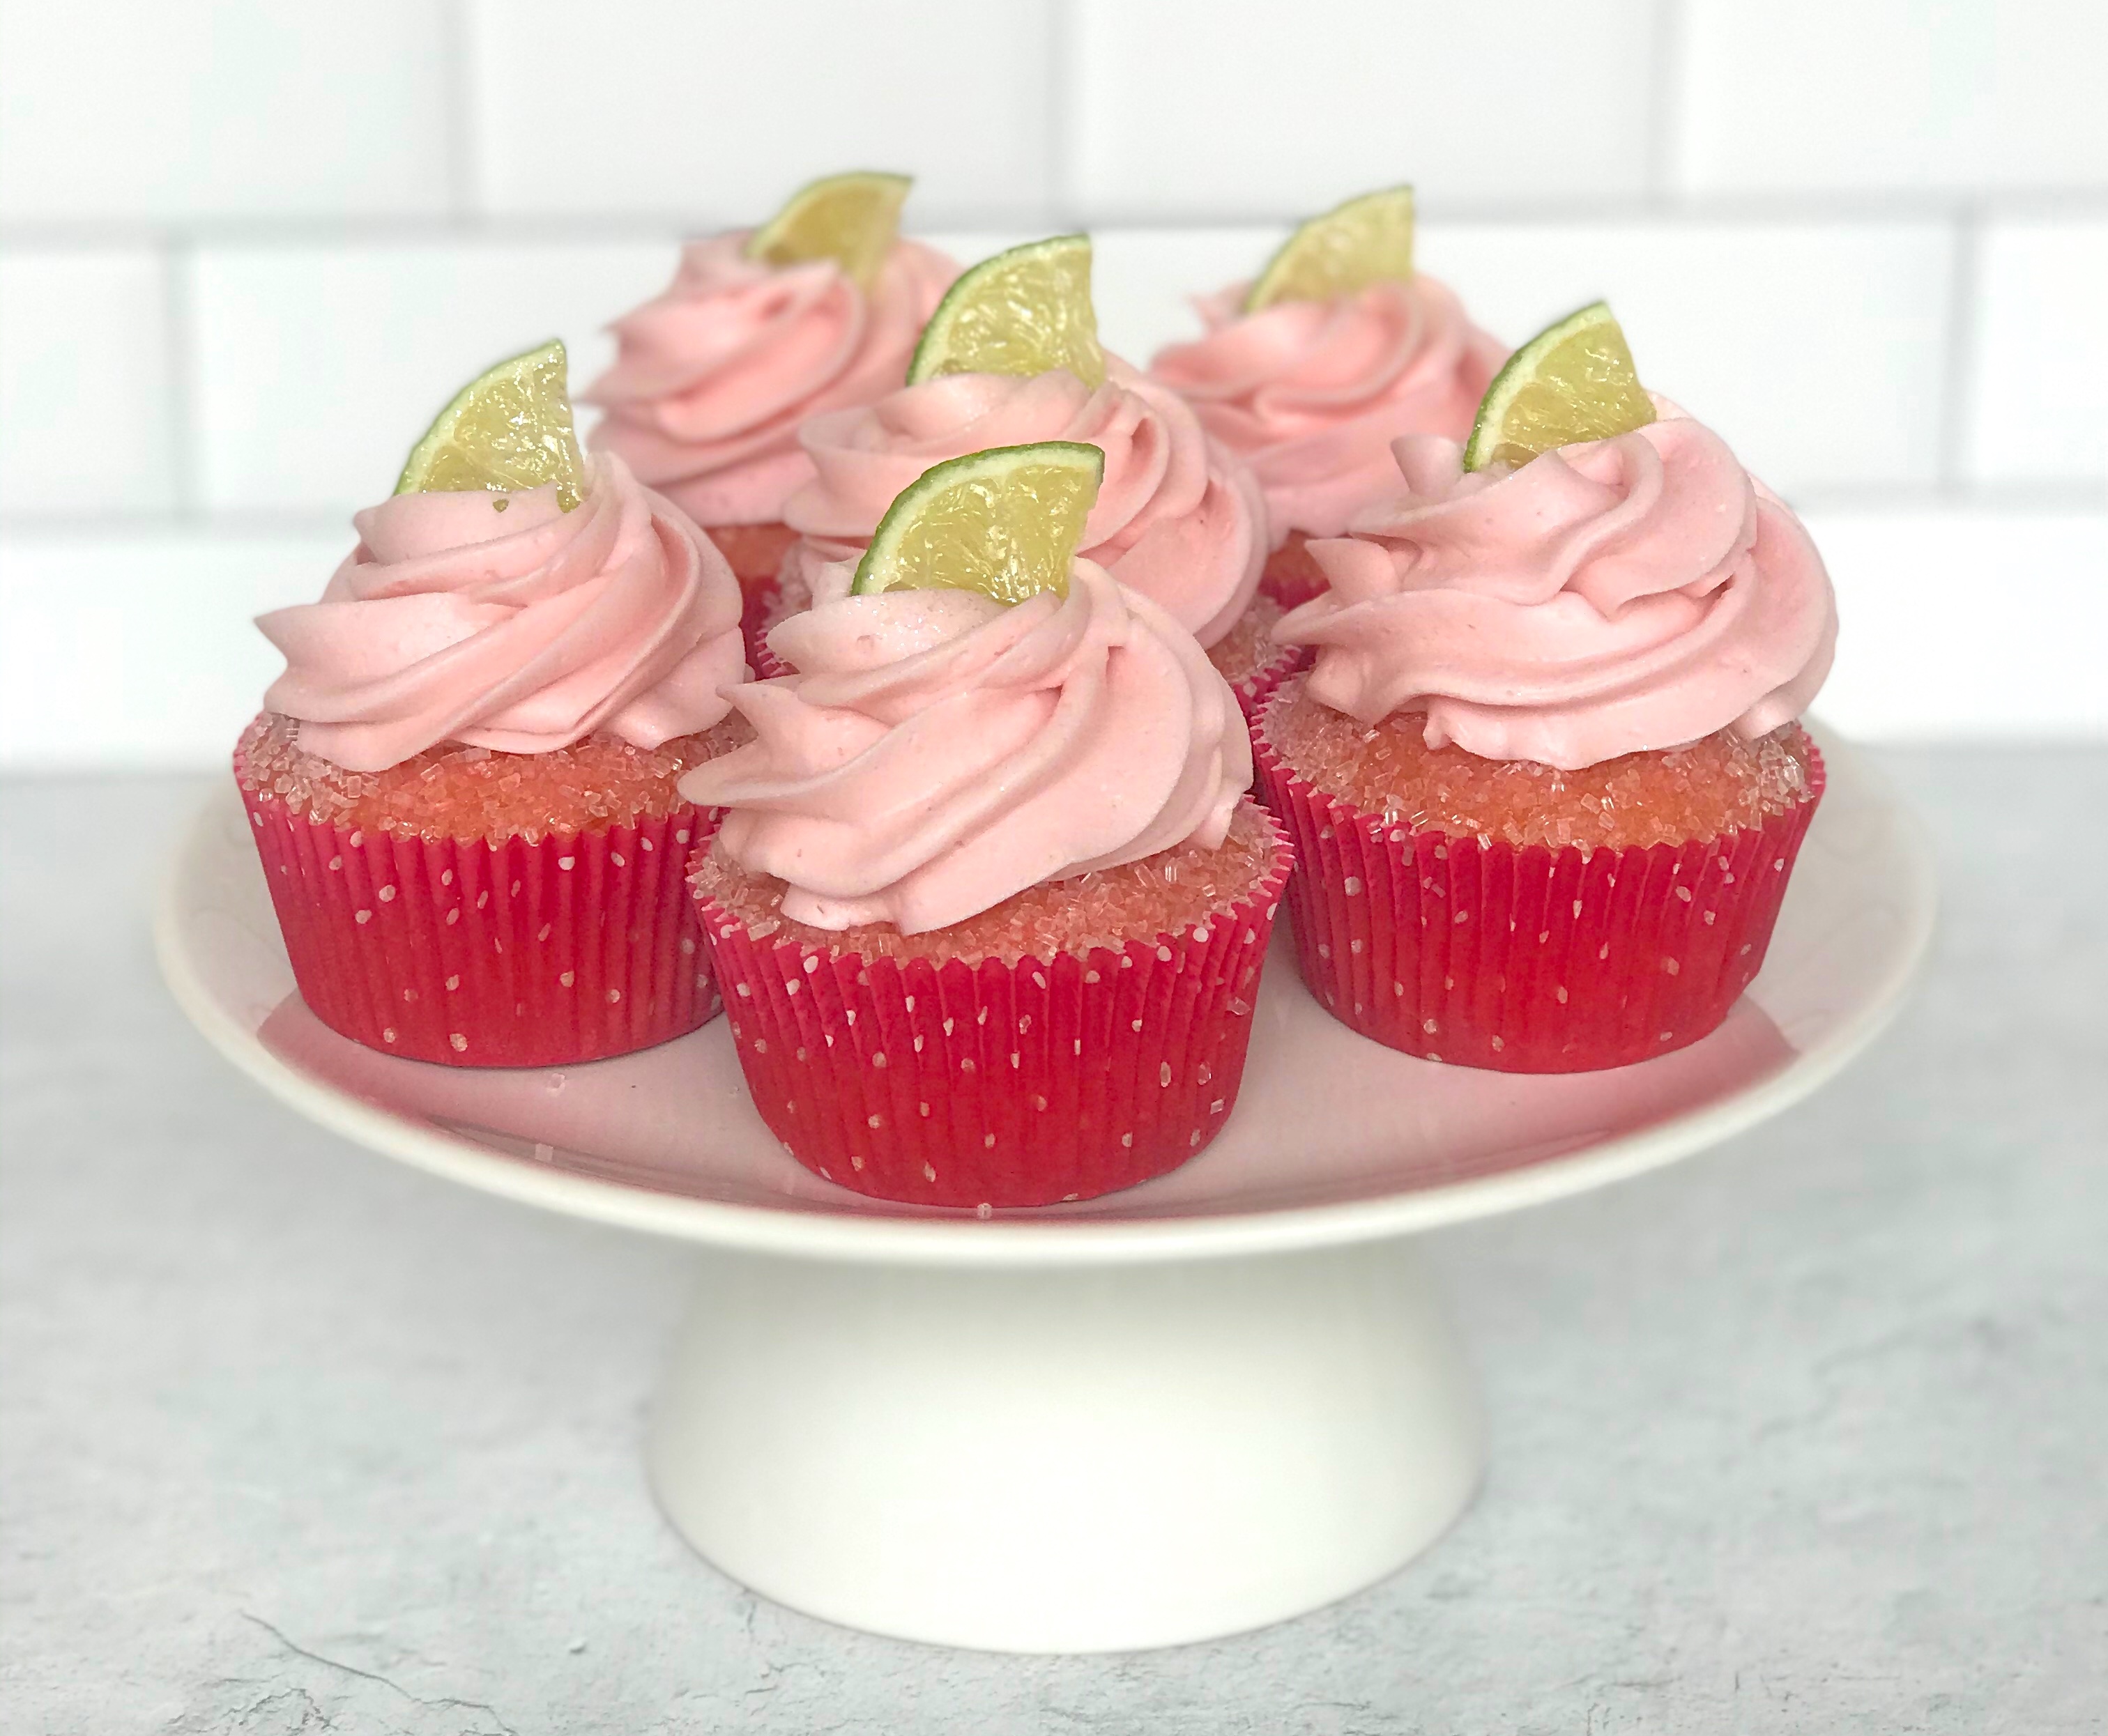 Image of Strawberry Margarita Cupcakes to represent the cupcake recipe from the Sugar Coin Academy blog.